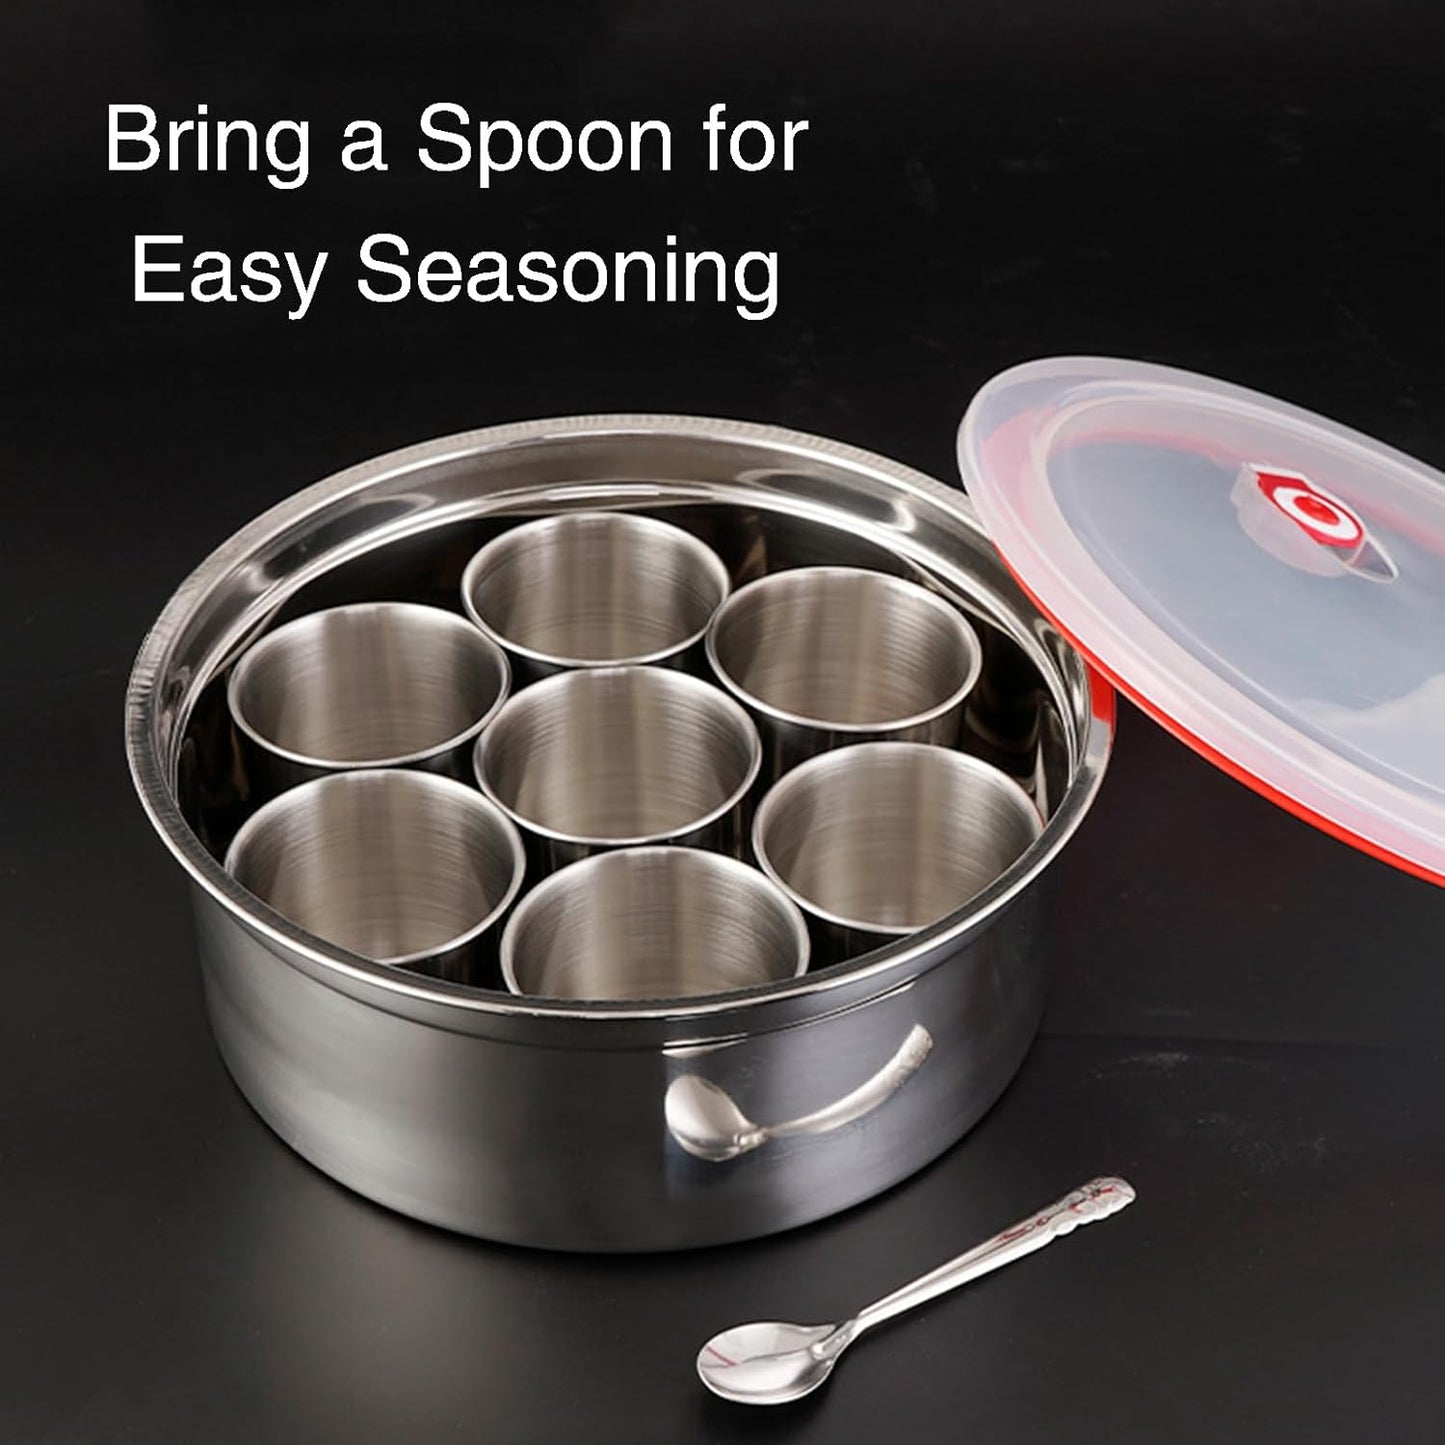 7 Grid Steel Spice Box With Spoon